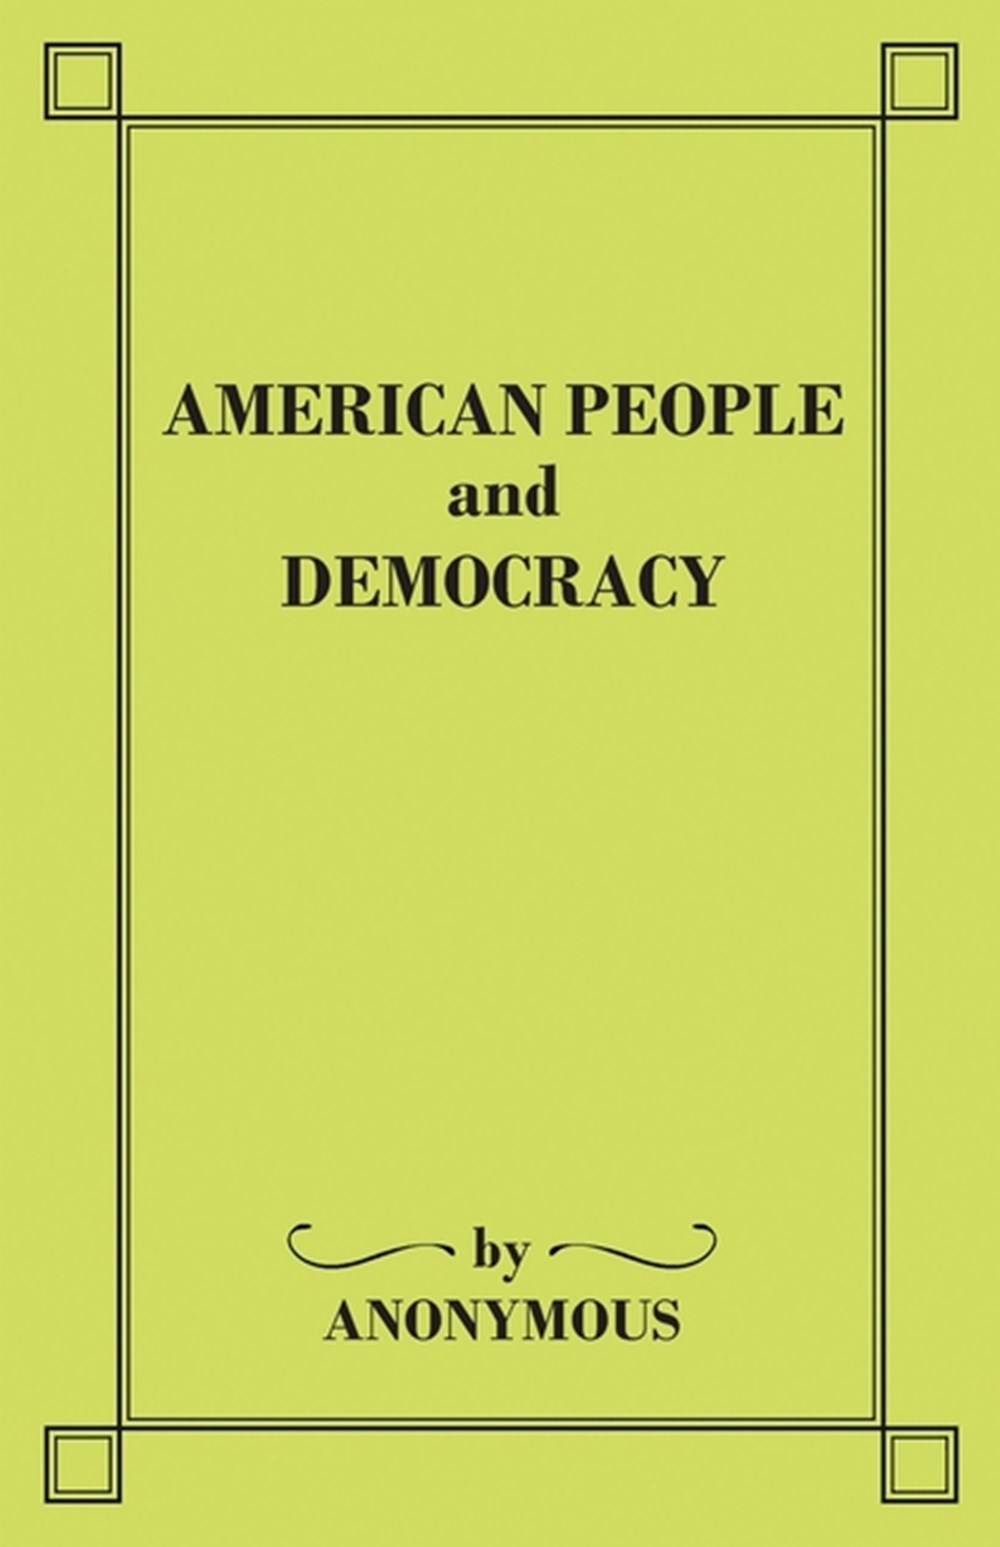 American People and Democracy